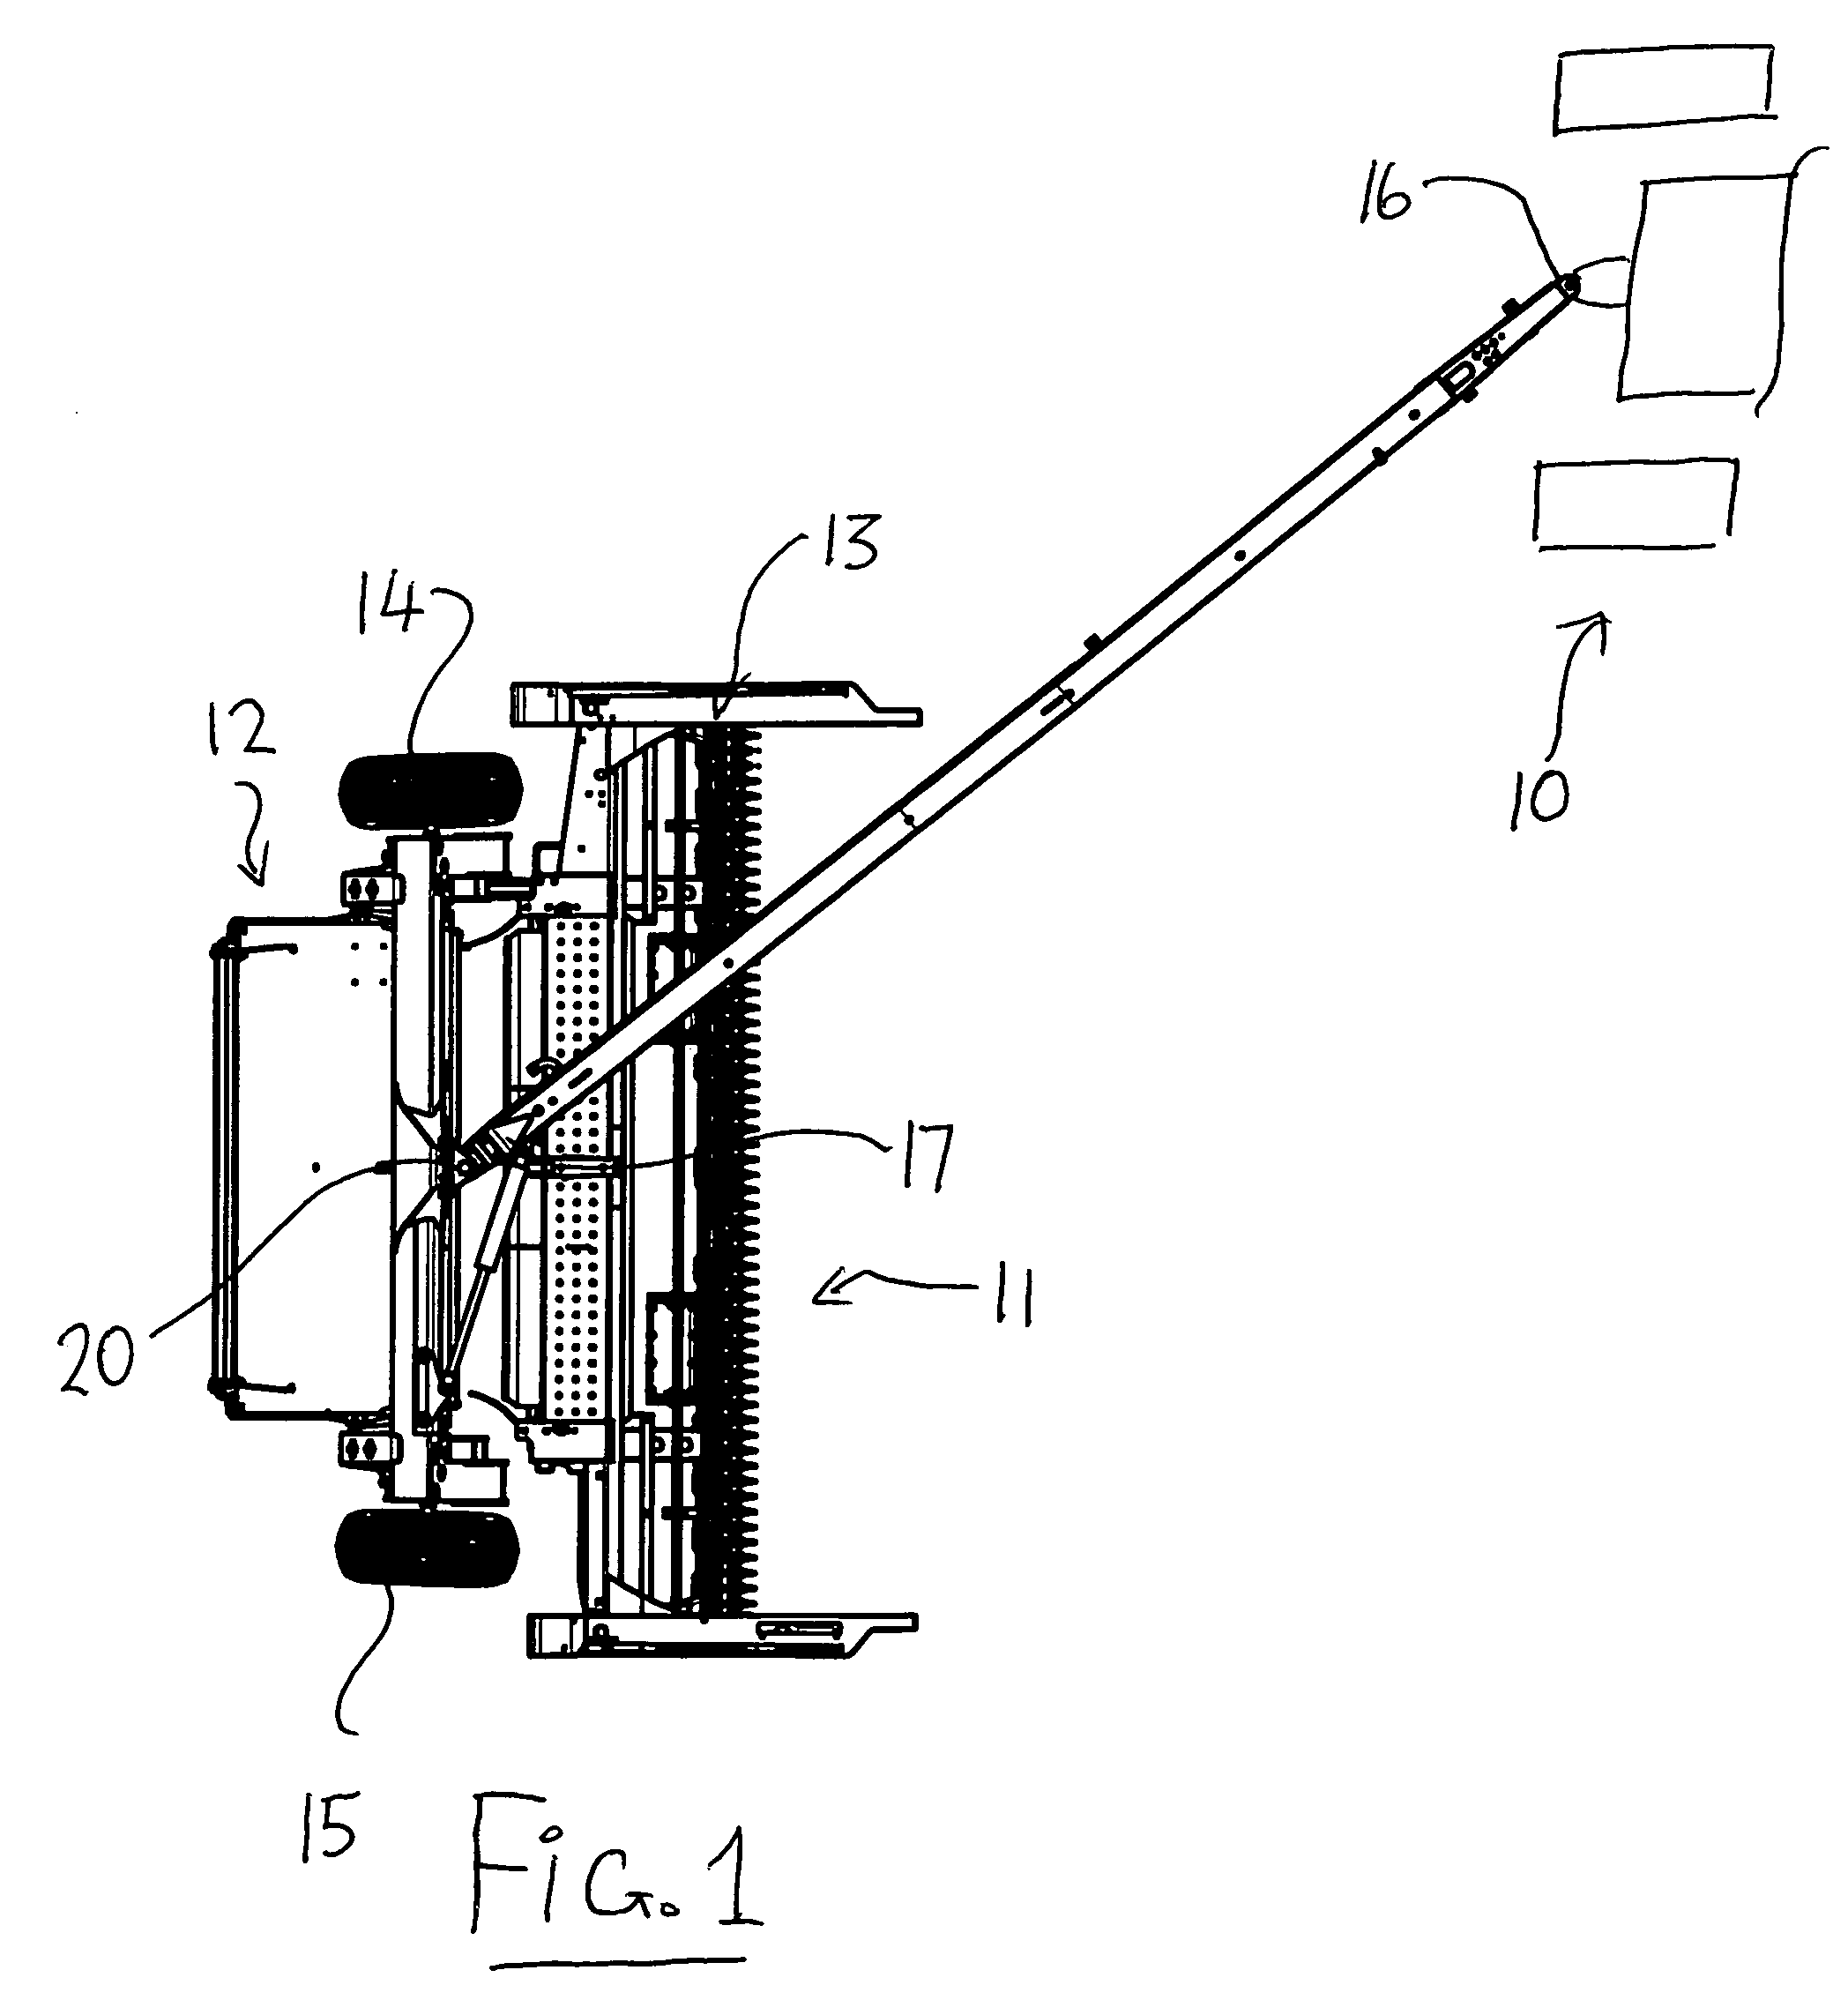 Adjustment of the hitch arm of a pull-type crop harvesting machine